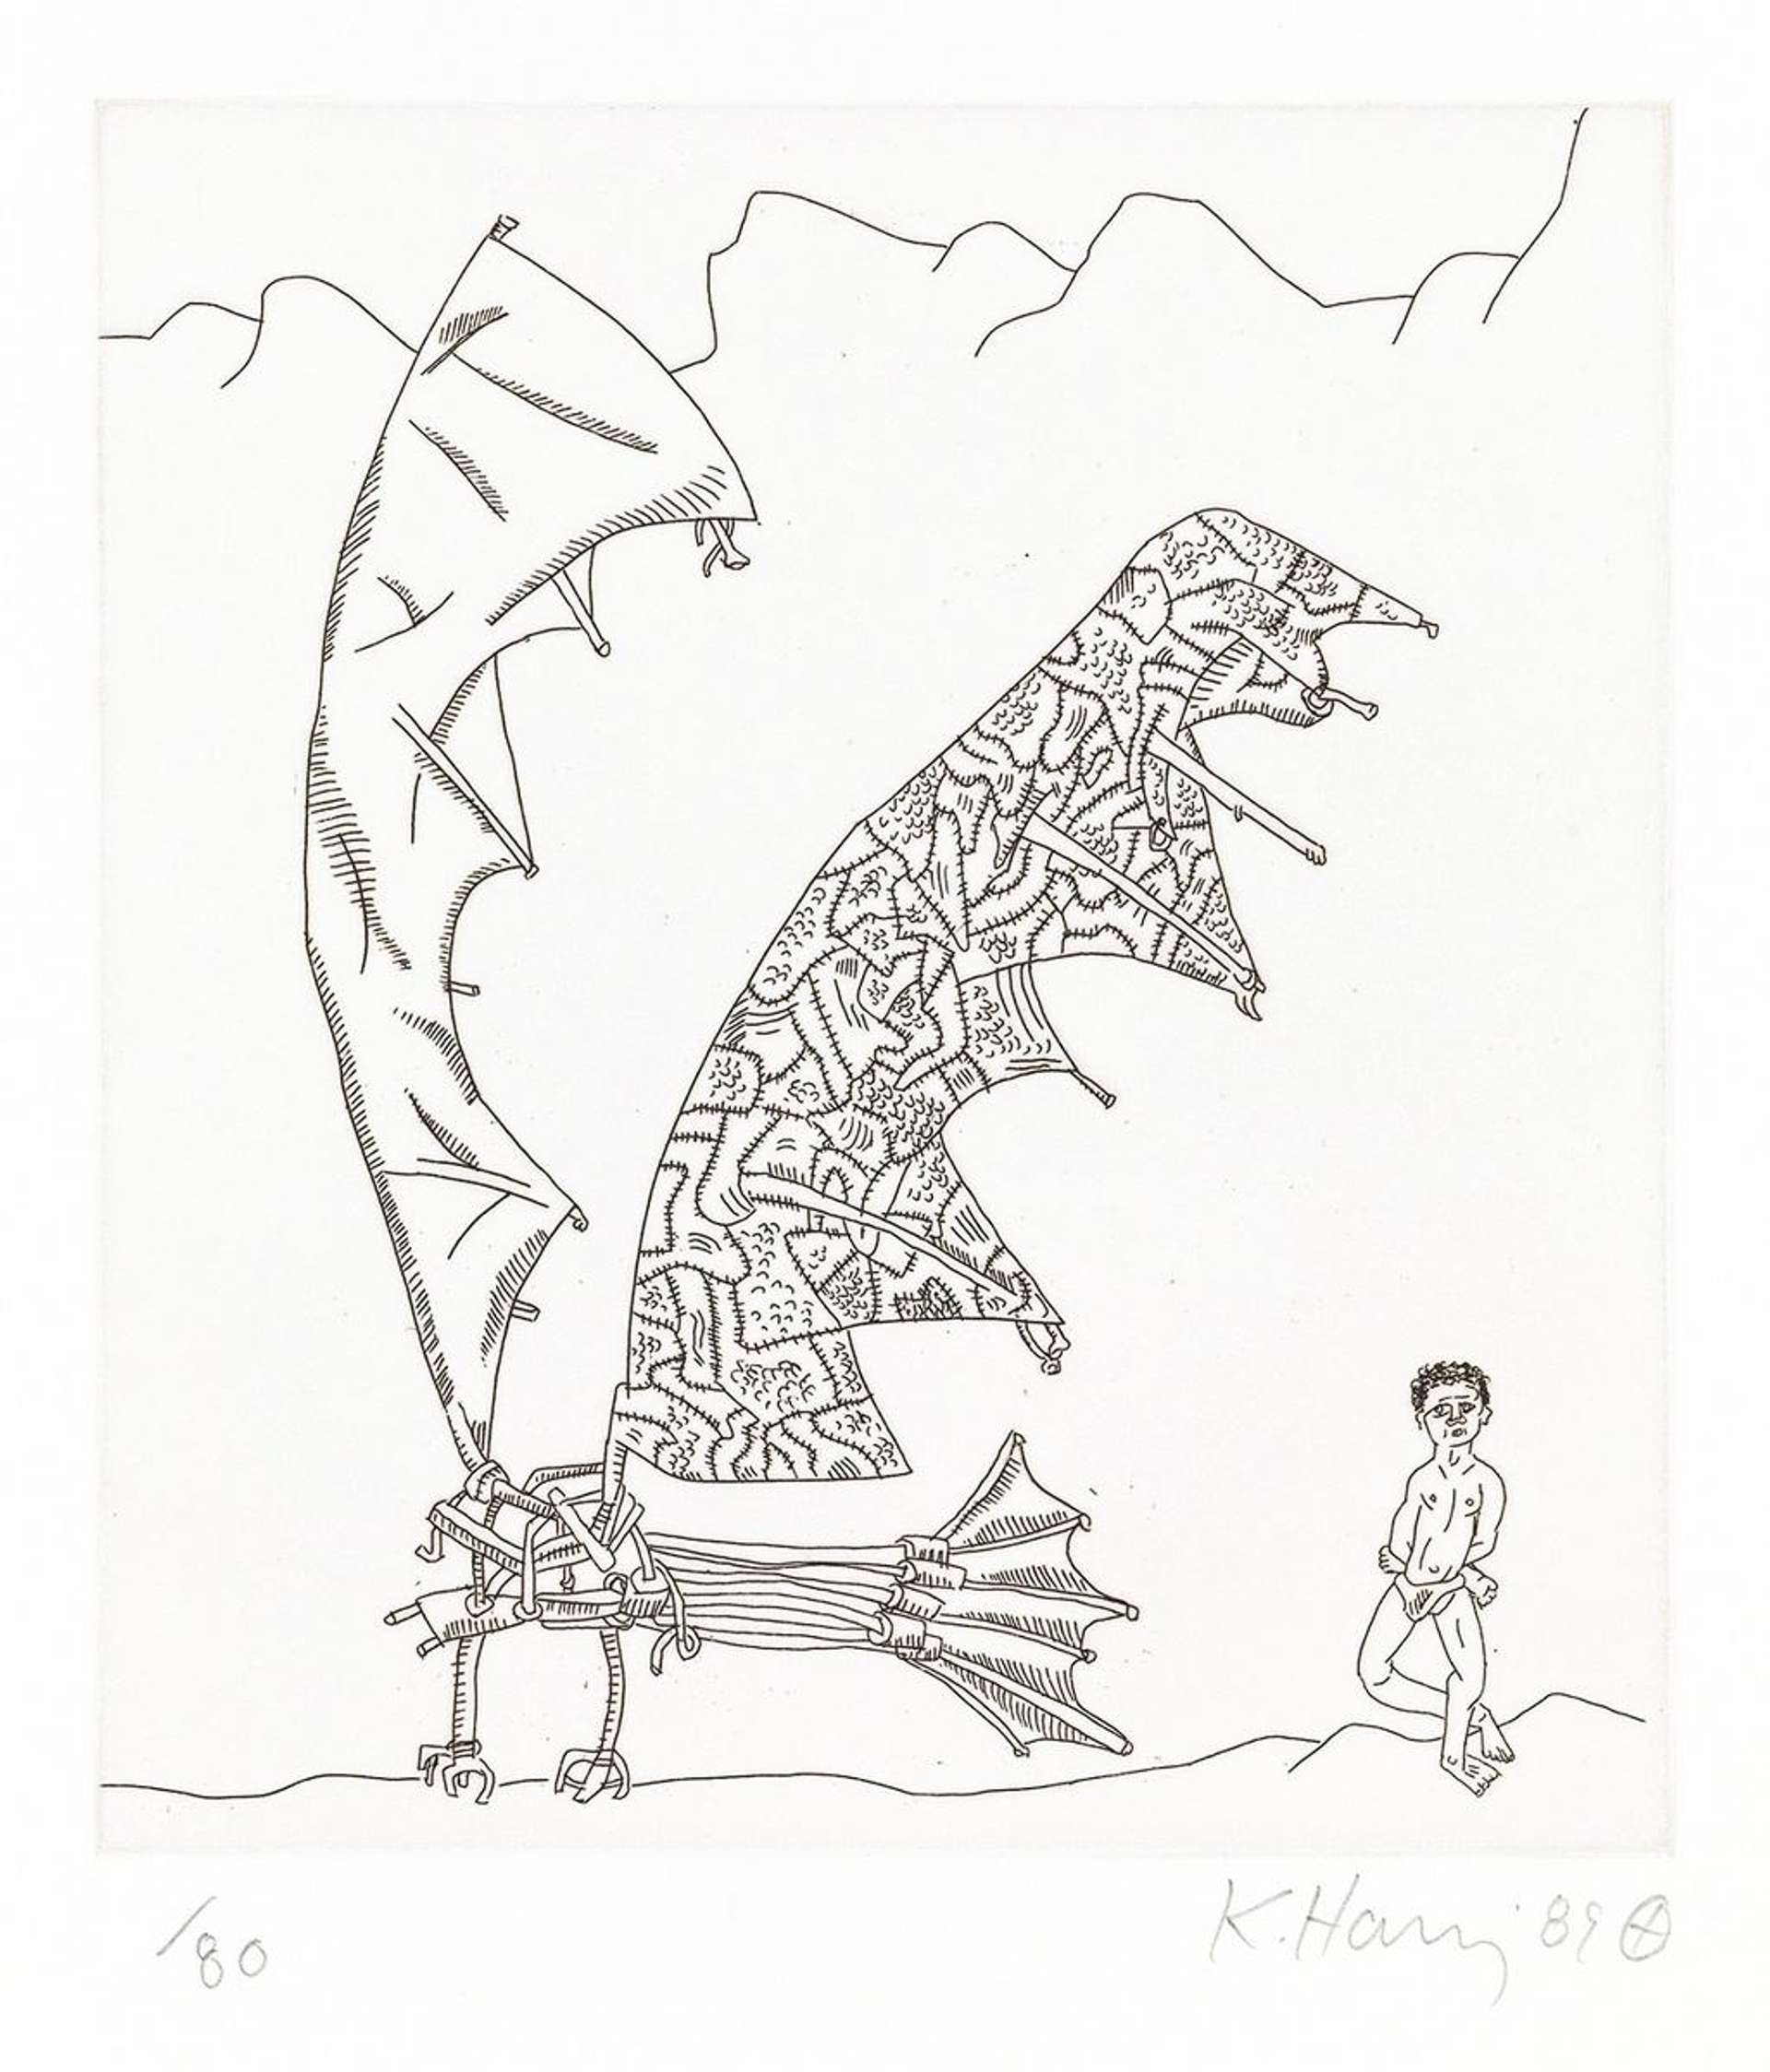 Keith Haring: The Valley Page 2 - Signed Print